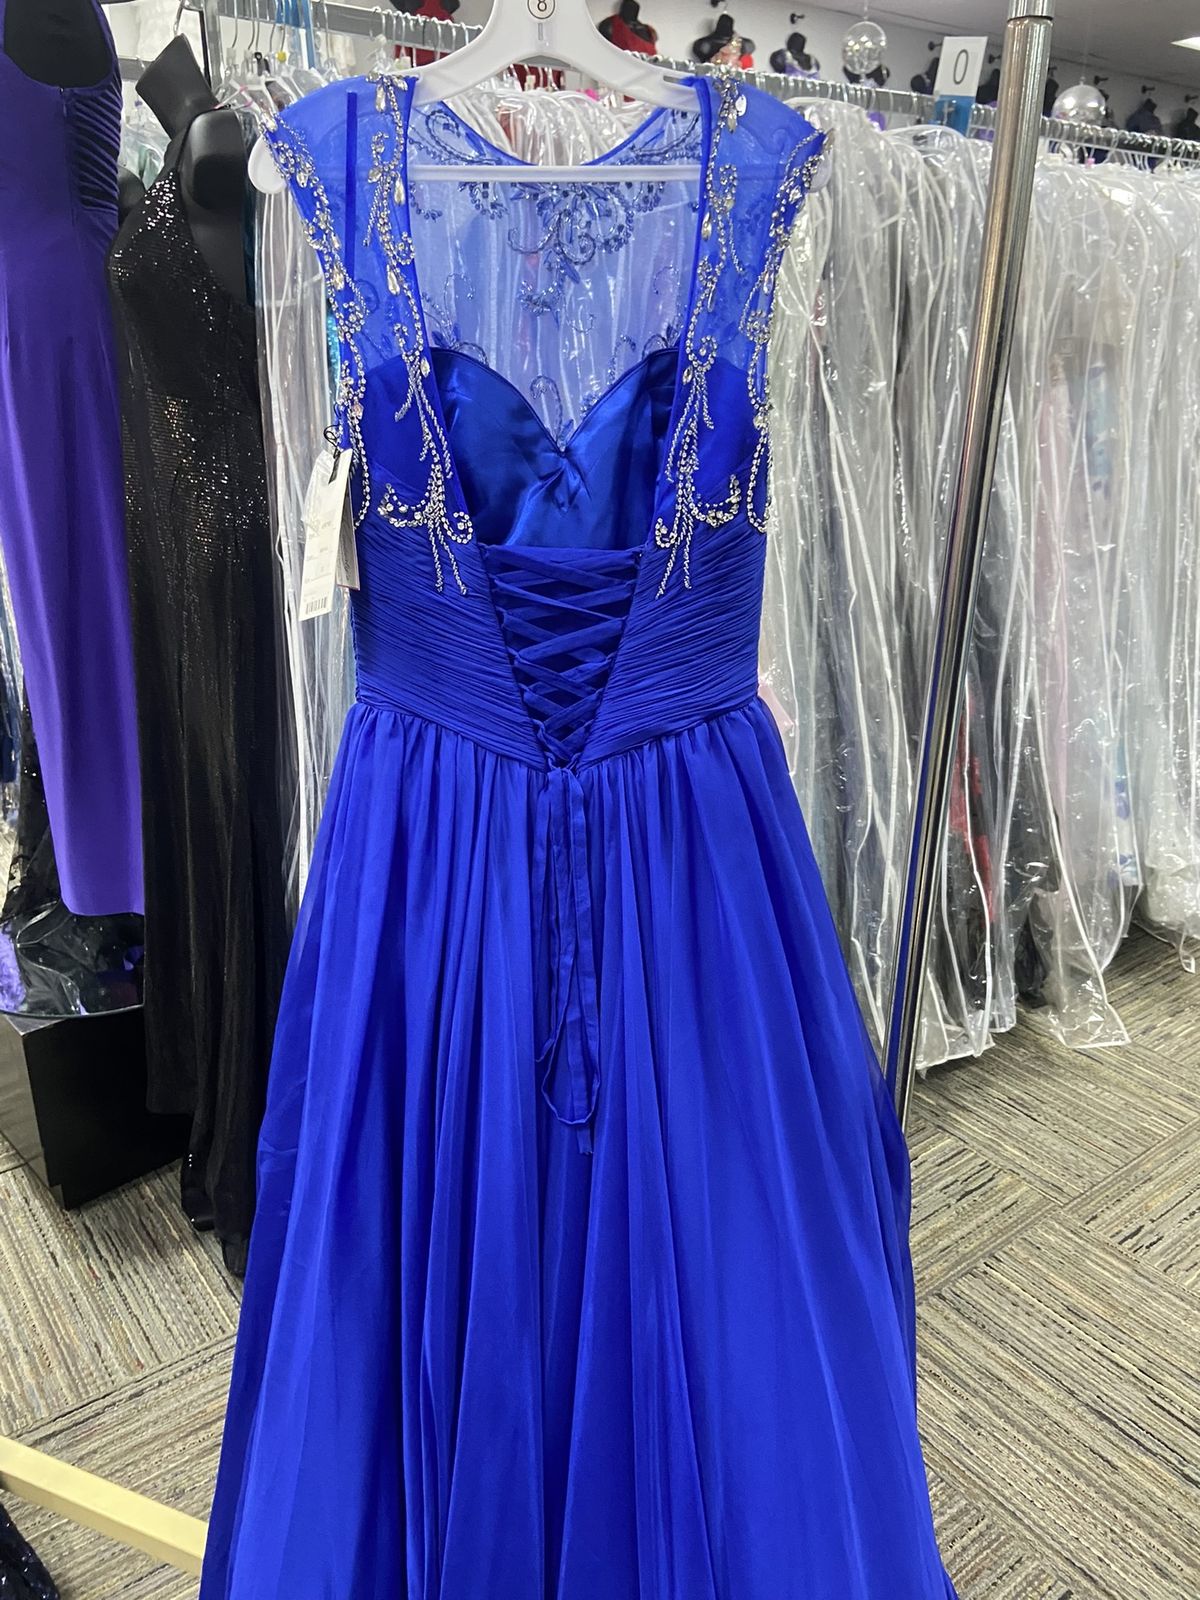 Style 65078H Mac Duggal Size 12 Royal Blue A-line Dress on Queenly